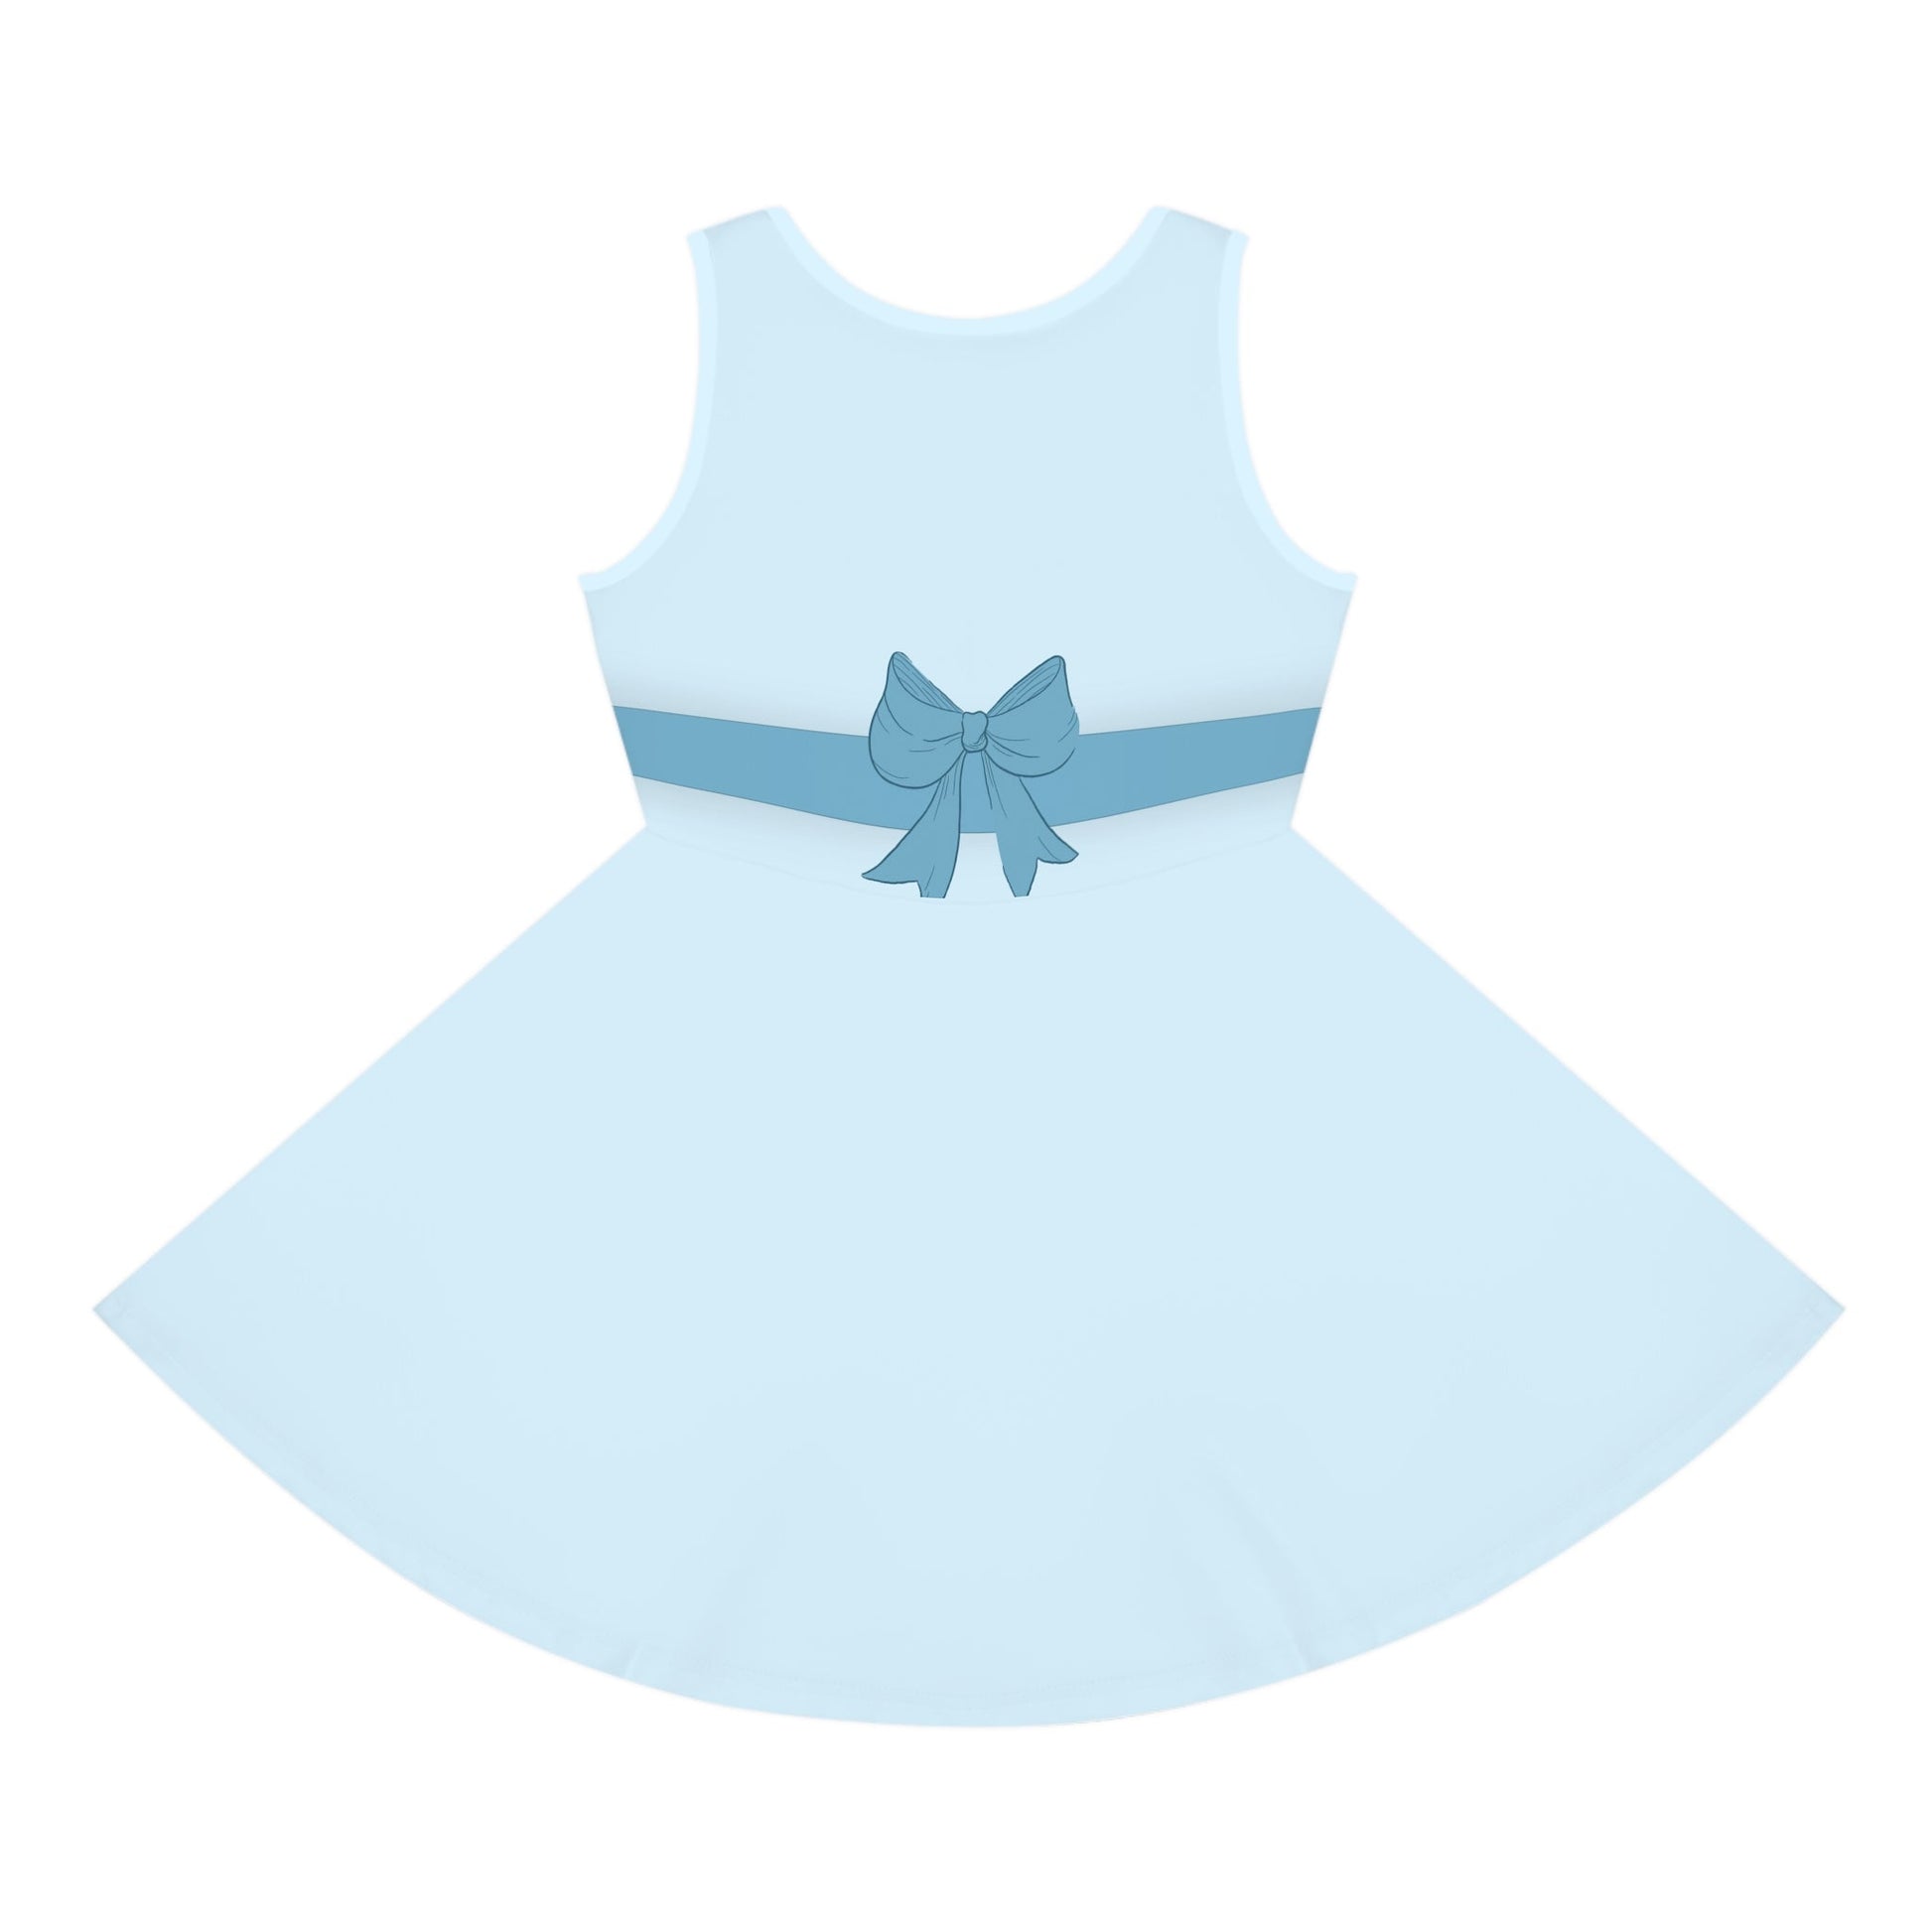 The Wendy Darling Girls' Sleeveless Sundress All Over PrintAOPAll Over PrintsWrong Lever Clothing